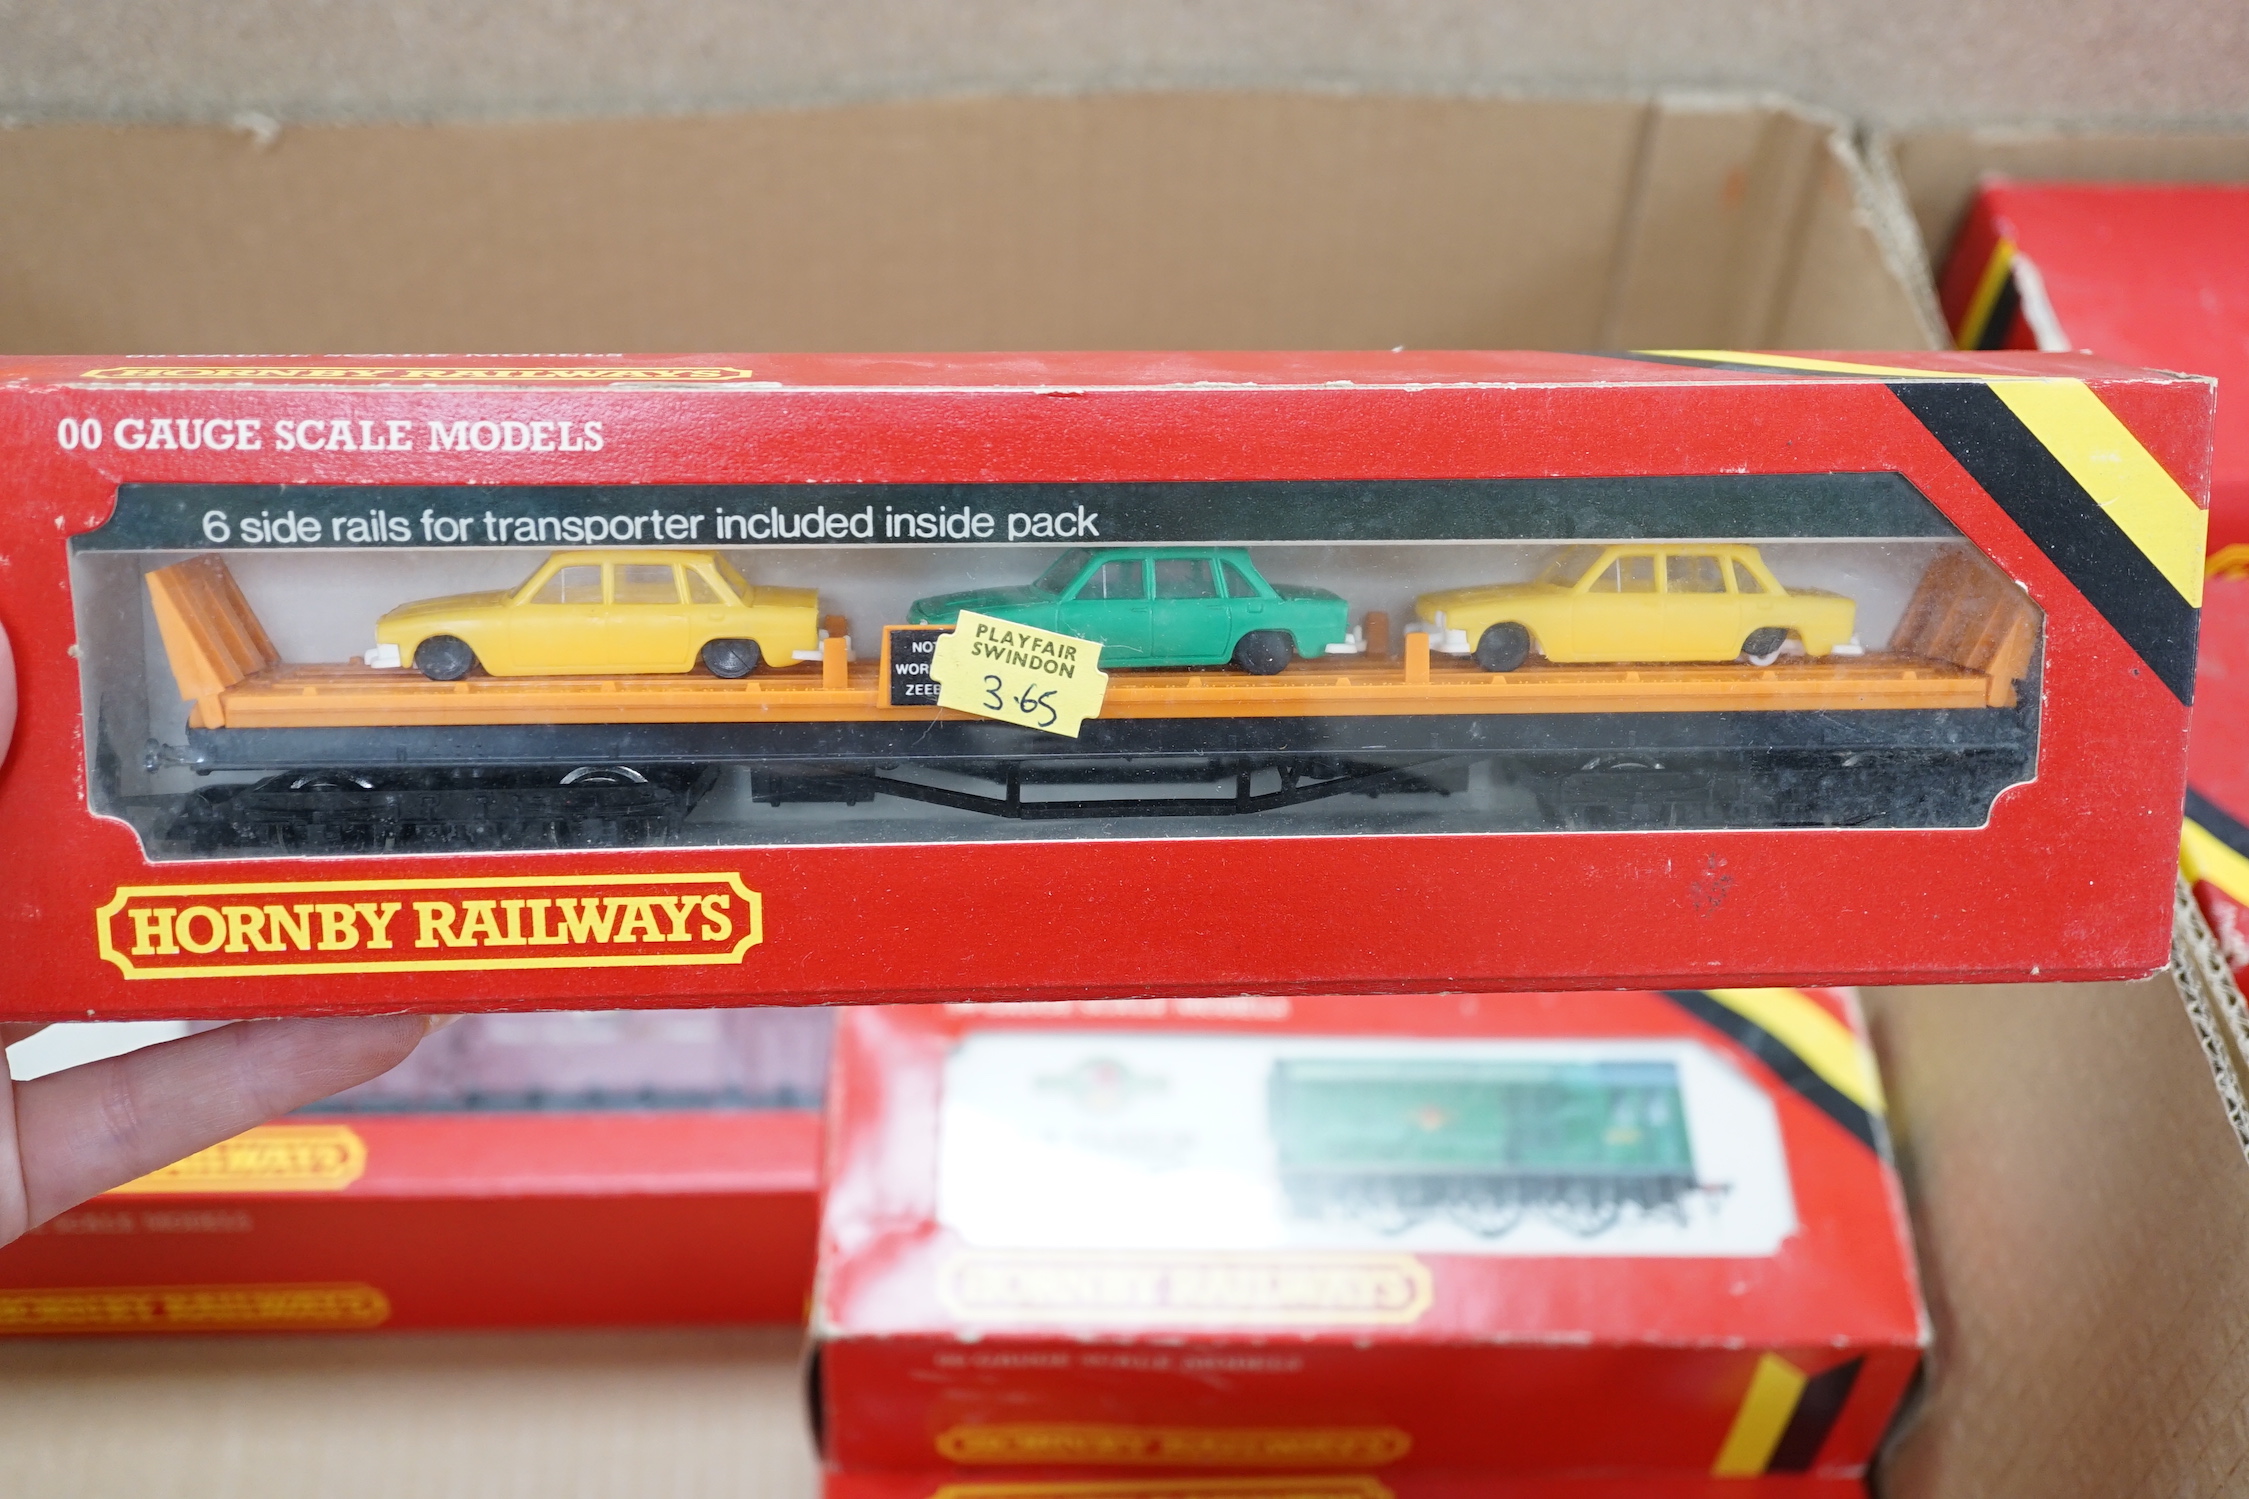 Thirty-six boxed Hornby railways 00 gauge items including five BR diesel locomotives; a Class 47 (R075), a Hymek (R074), a Class 25 (R068) and two Class 08 shunters (R156), together with fifteen freight wagons, twelve bo